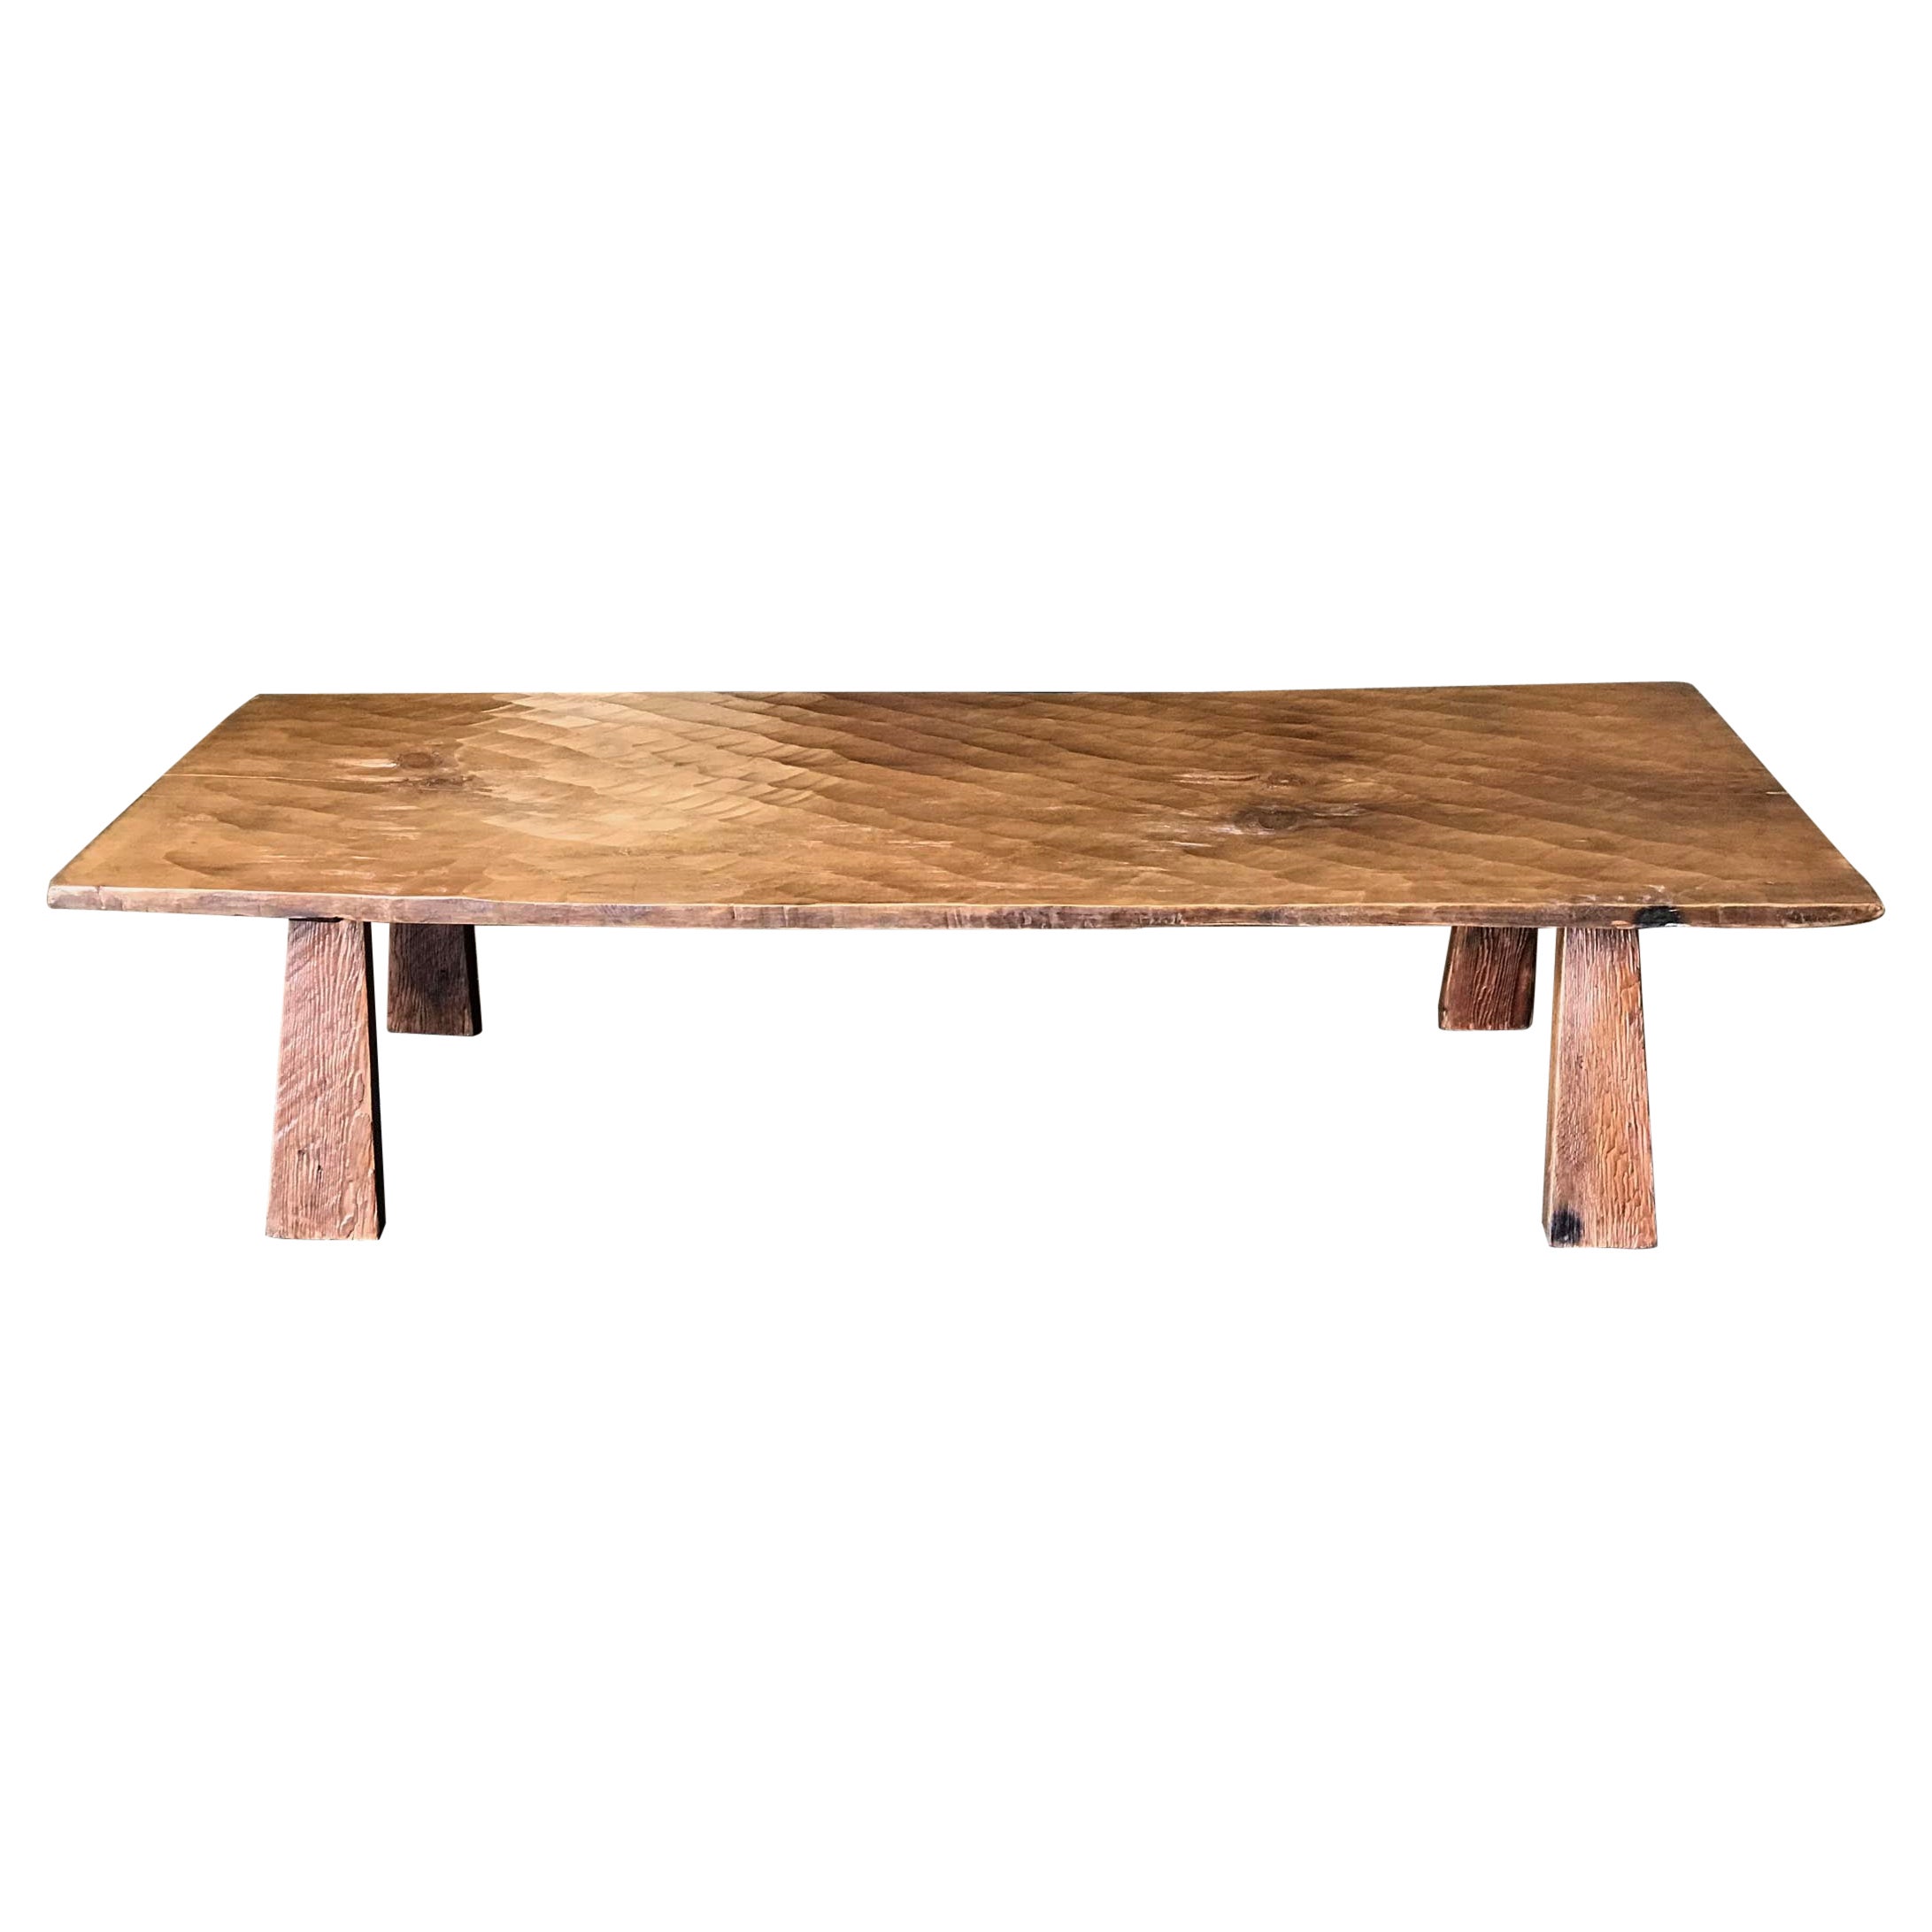 Rustic One Wide Board Hand Hewn Coffee Table